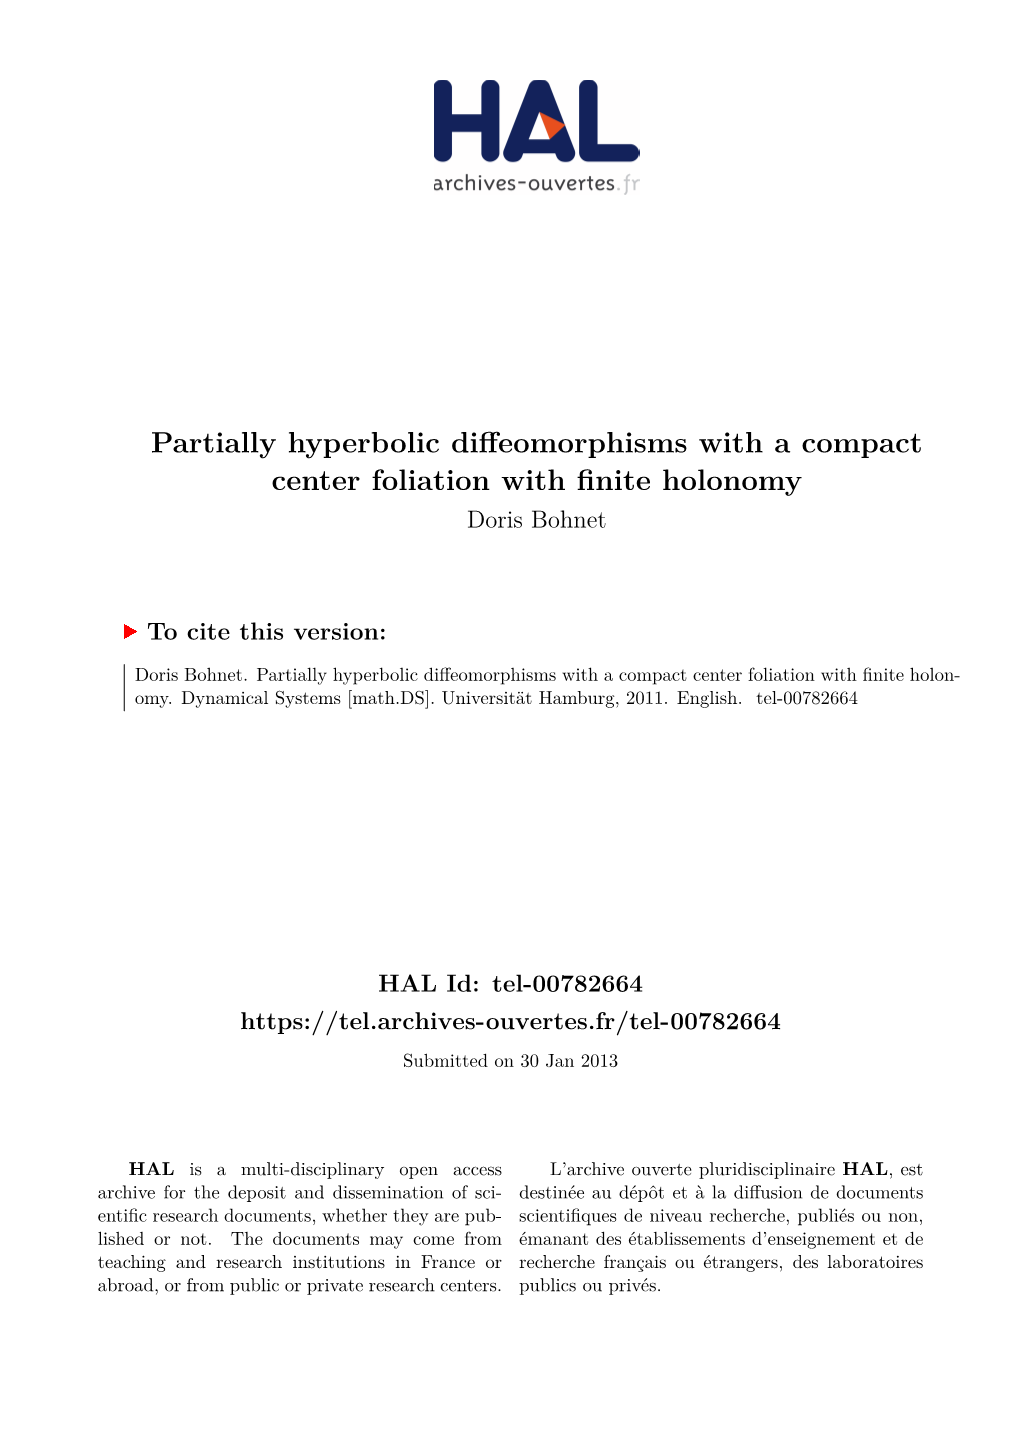 Partially Hyperbolic Diffeomorphisms with a Compact Center Foliation with Finite Holonomy Doris Bohnet